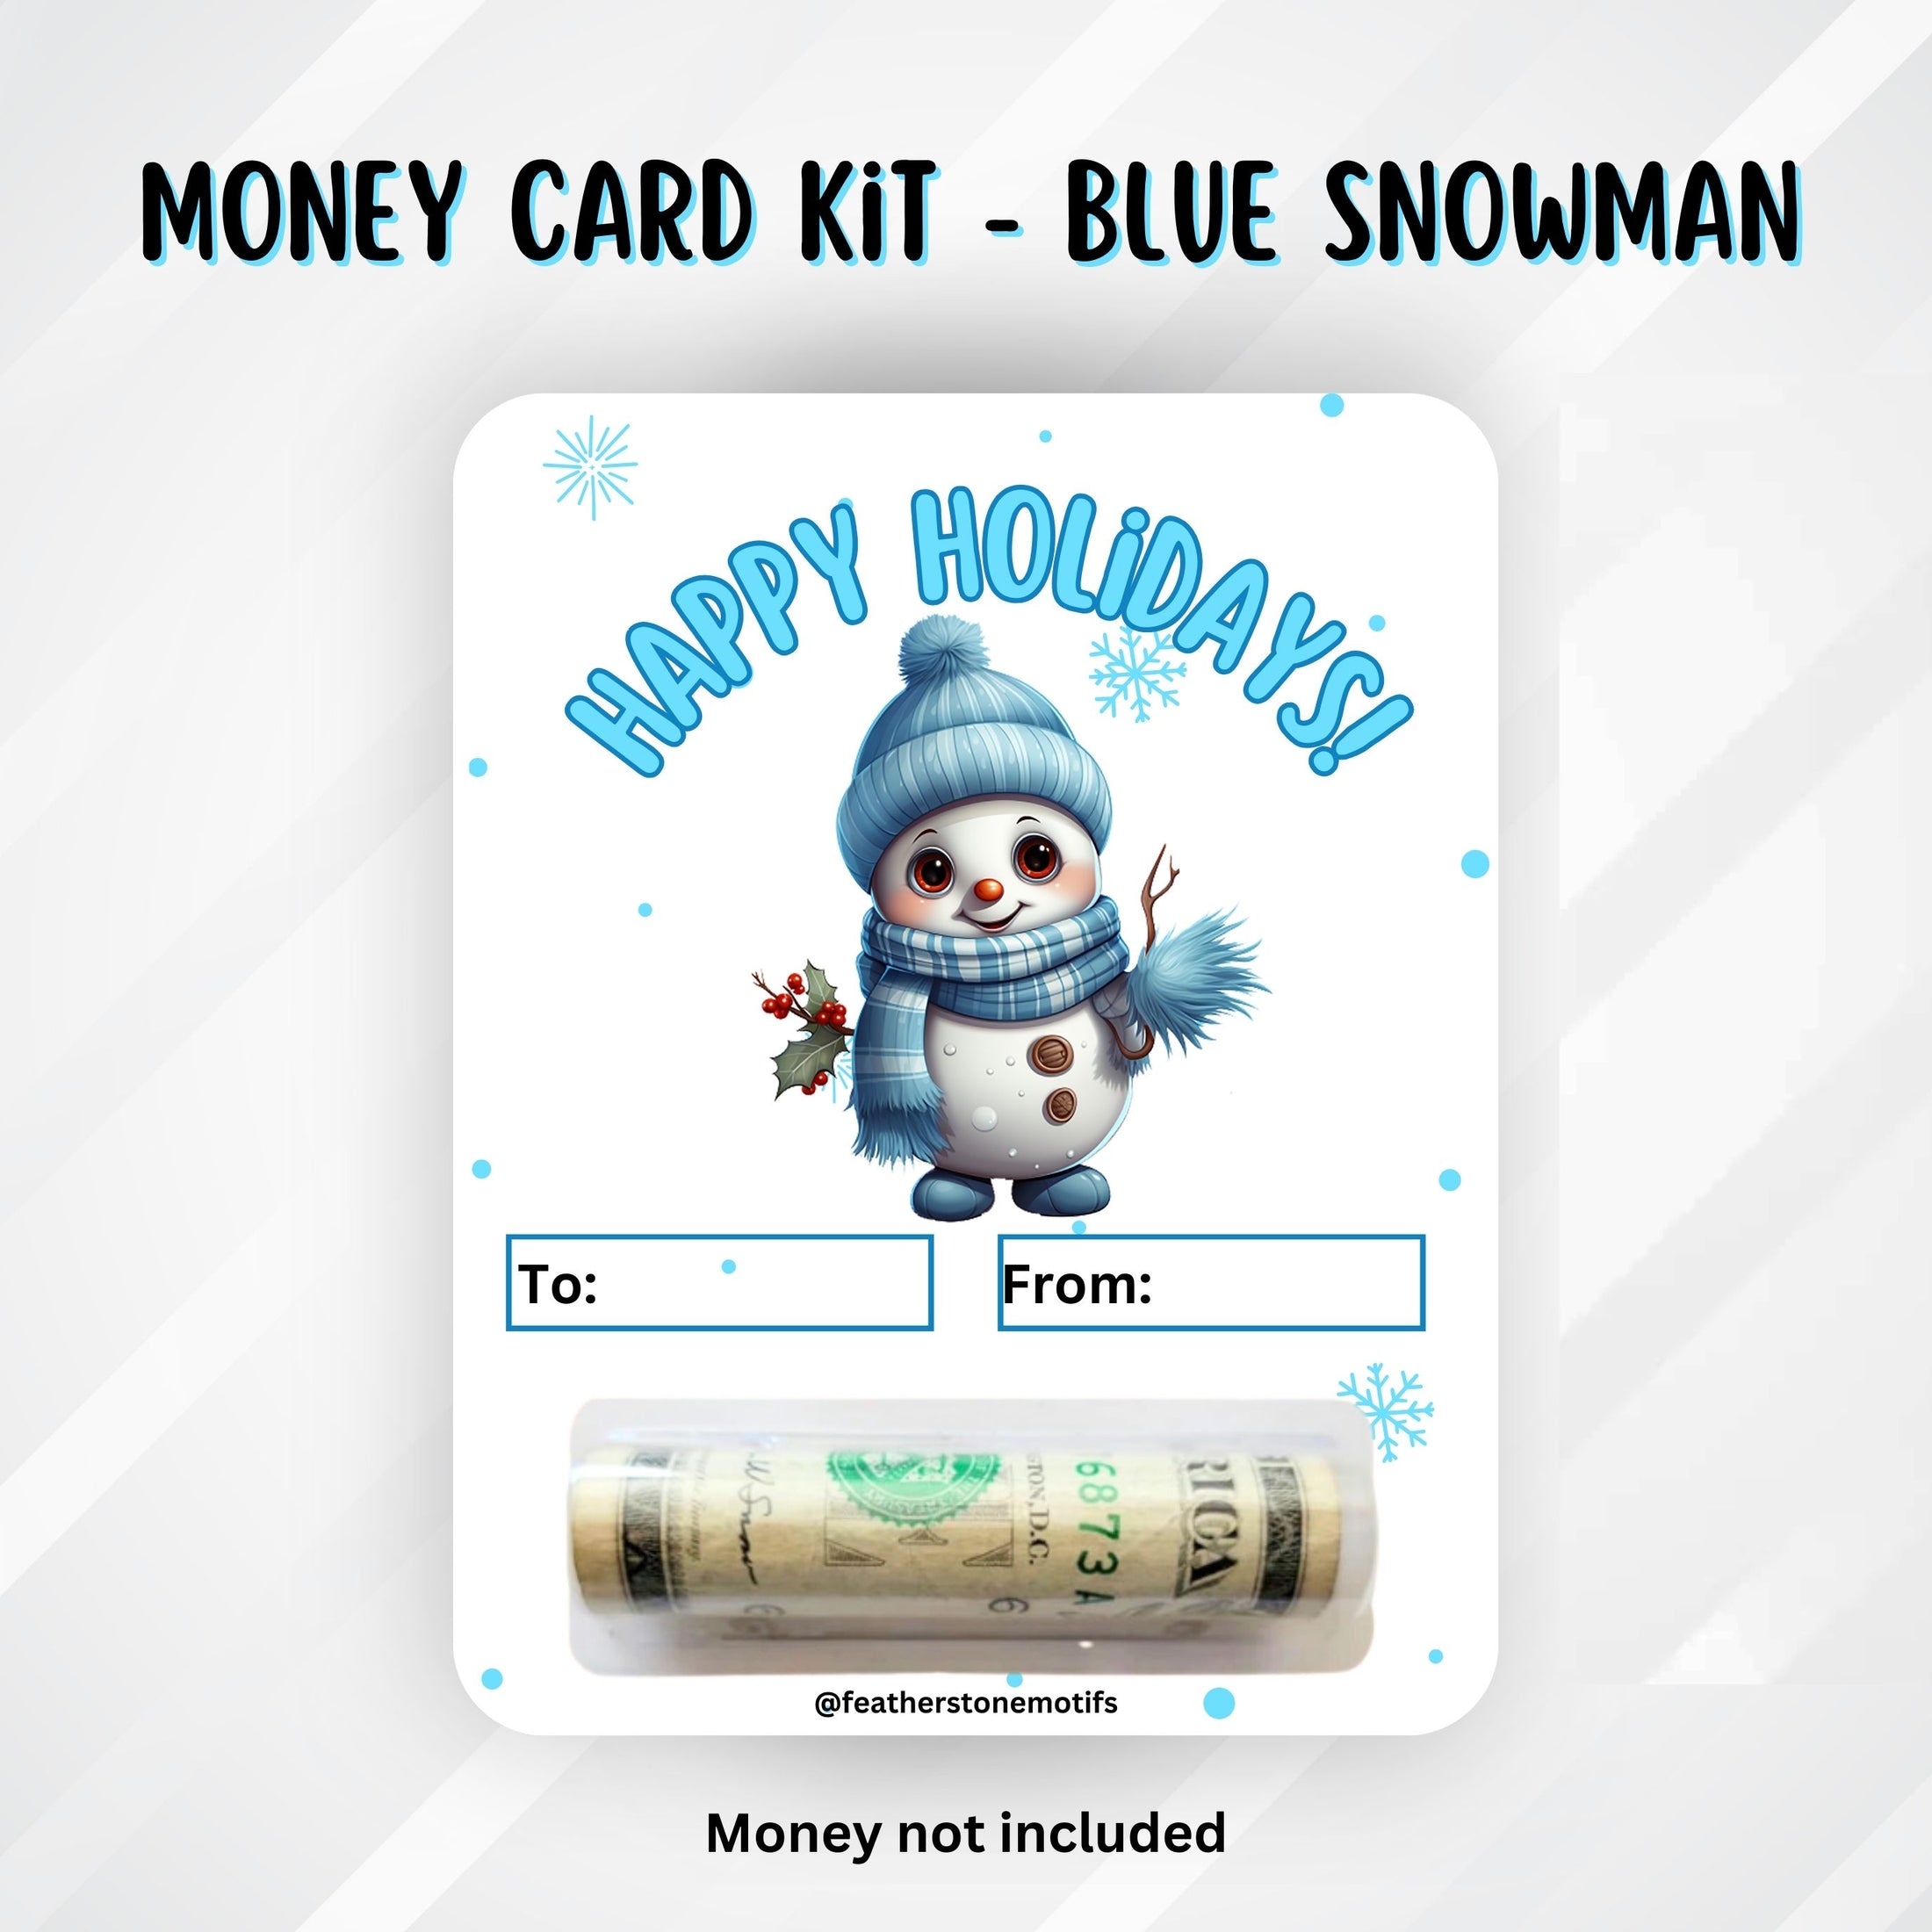 This image shows the Blue Snowman money card with the money tube attached.